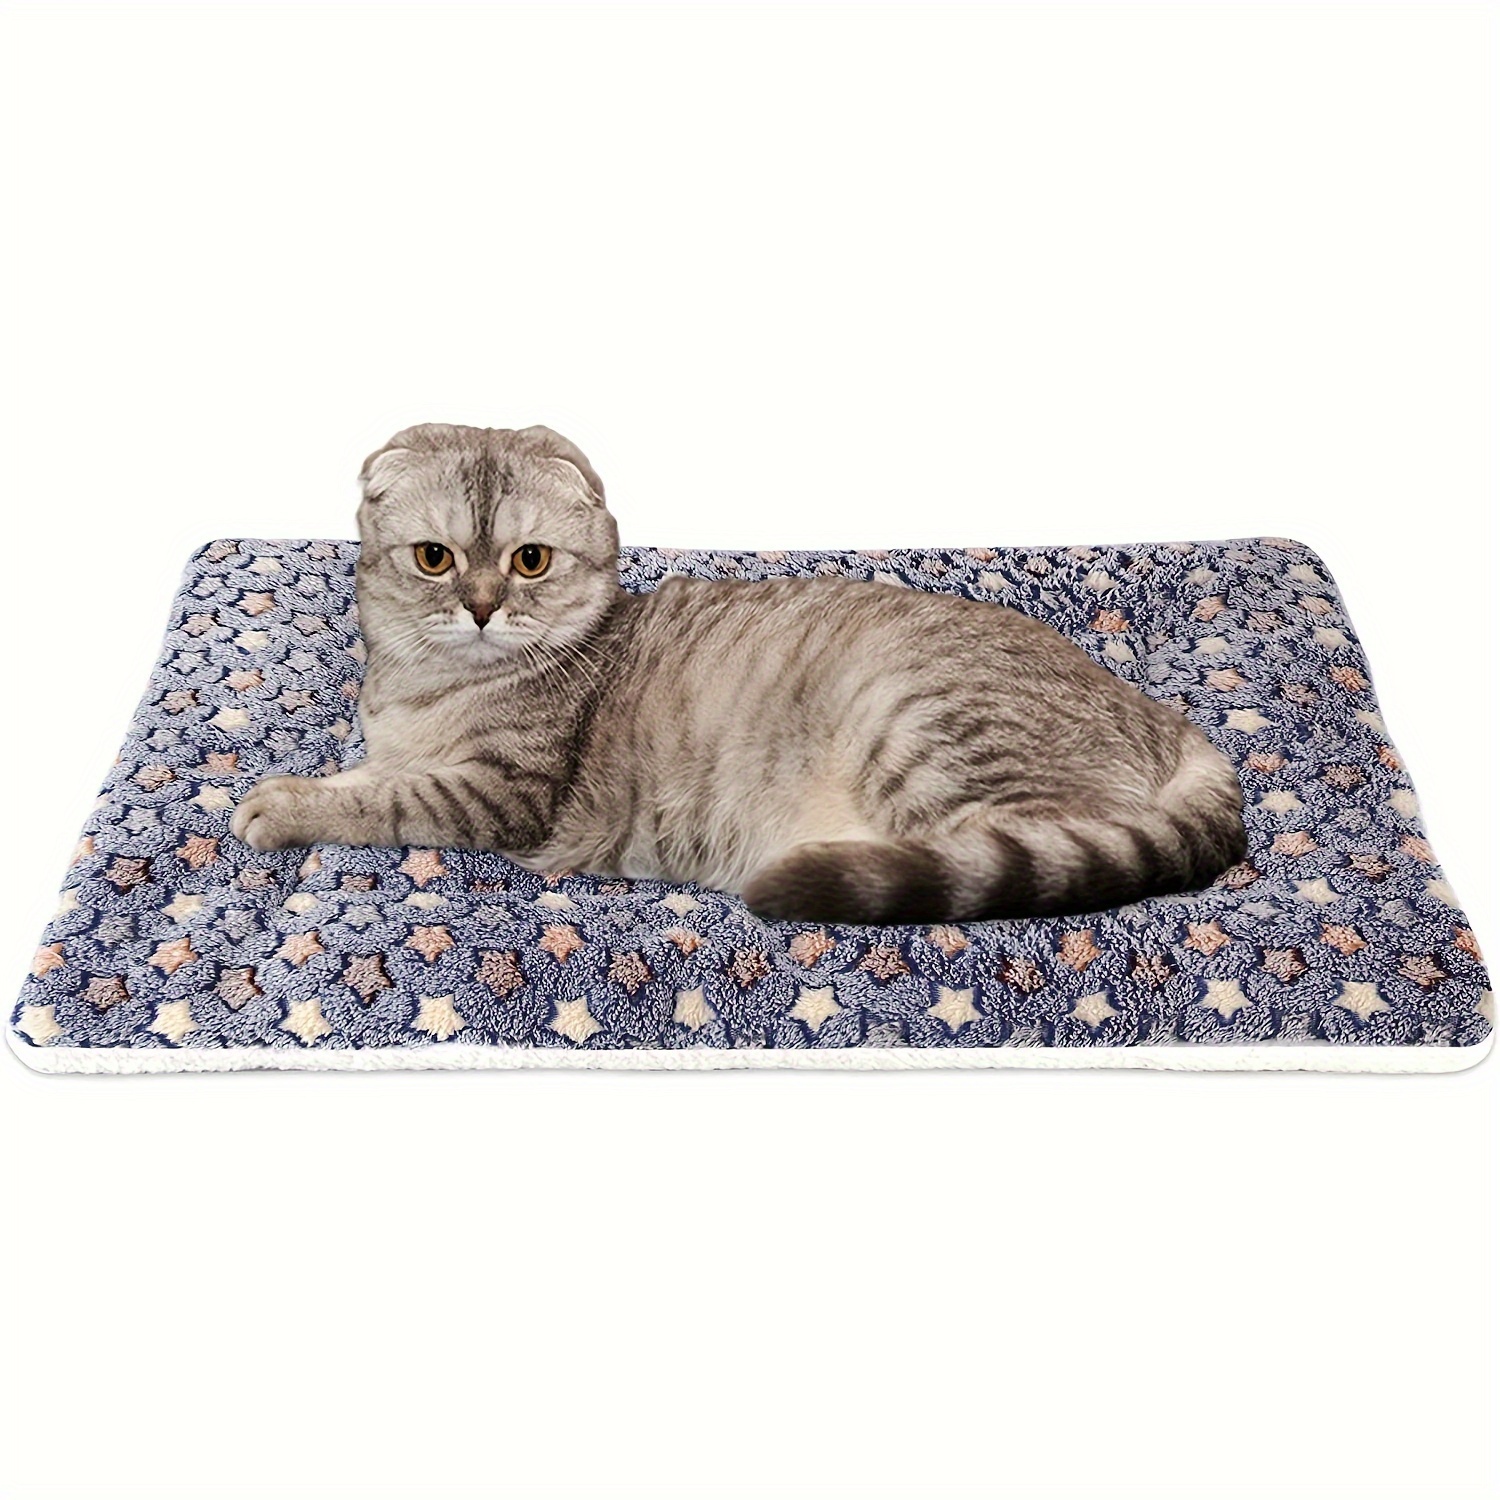 Mora Pets Ultra Soft Pet (Dog/Cat) Bed Mat with Cute Prints | Reversible Fleece Dog Crate Kennel Pad | Machine Washable Pet